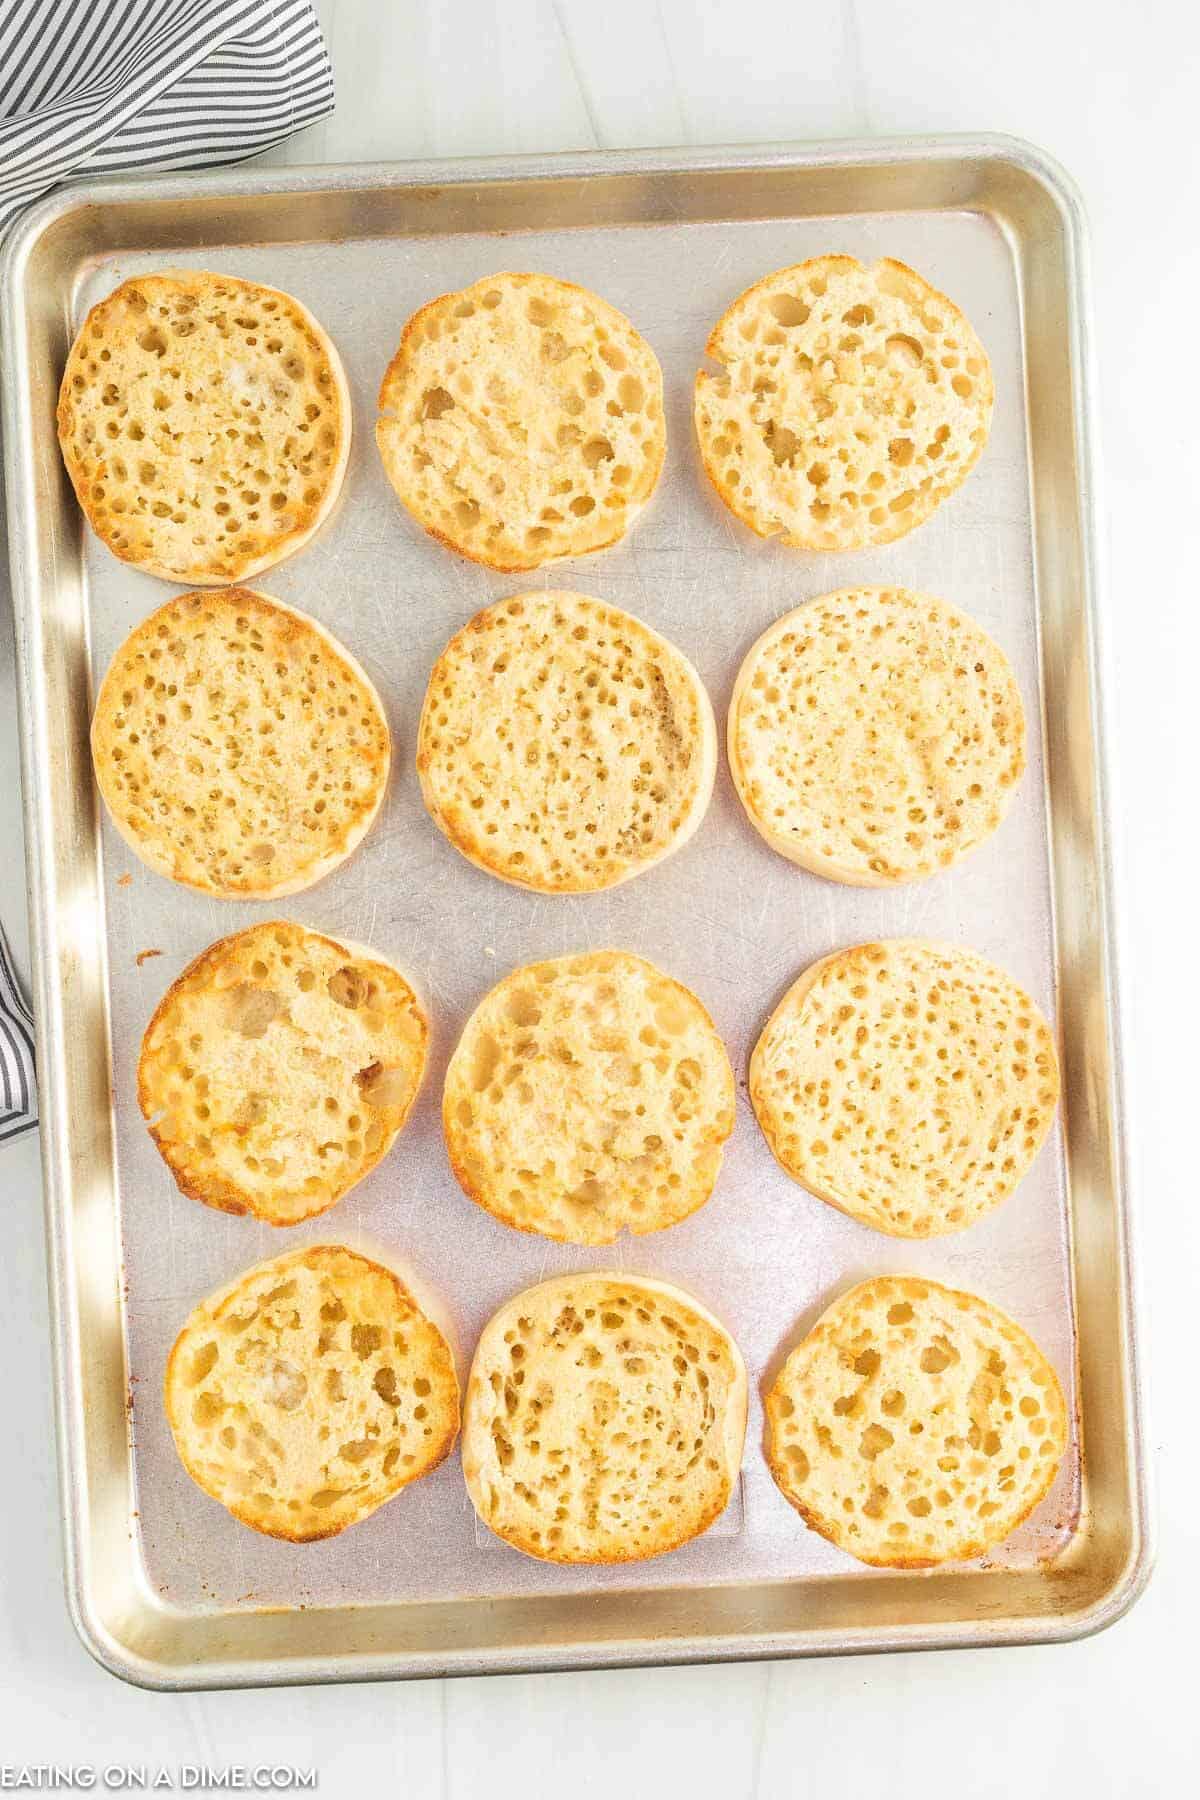 Toasted English Muffins on a baking sheet